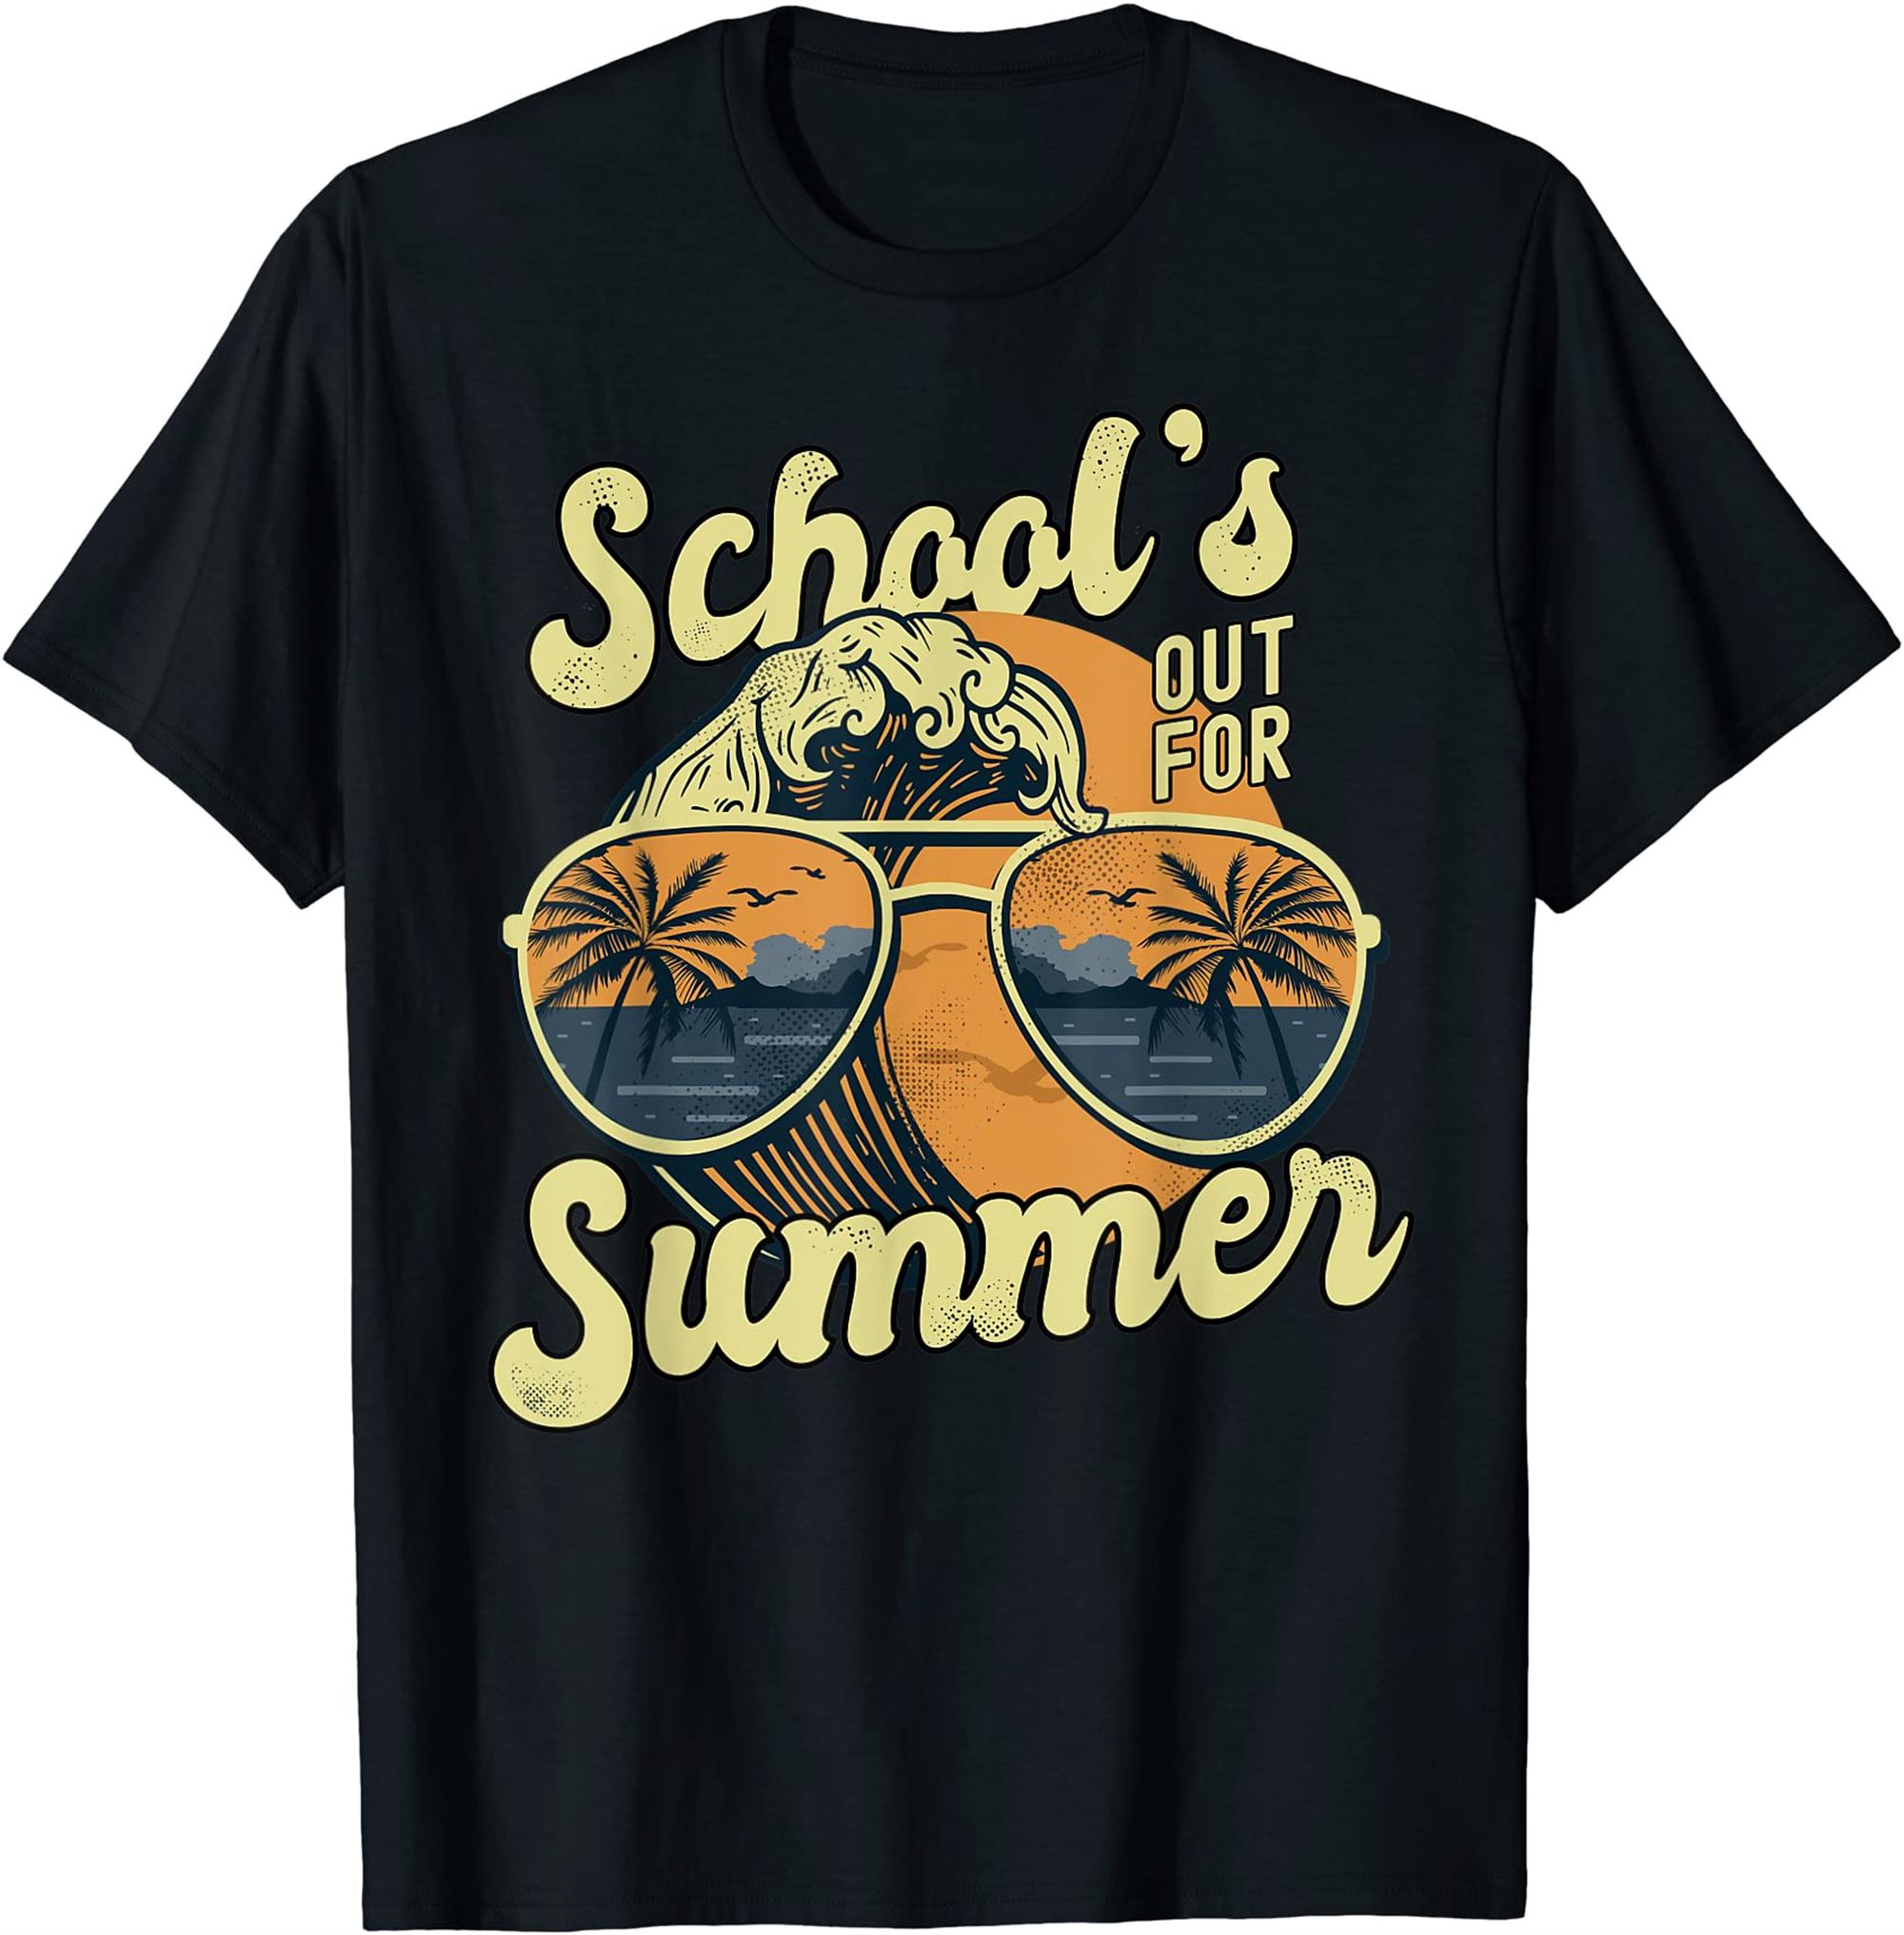 Schools Out For Summer For Teacher Cool Last Day Vintage T-shirt Size Up To 5xl